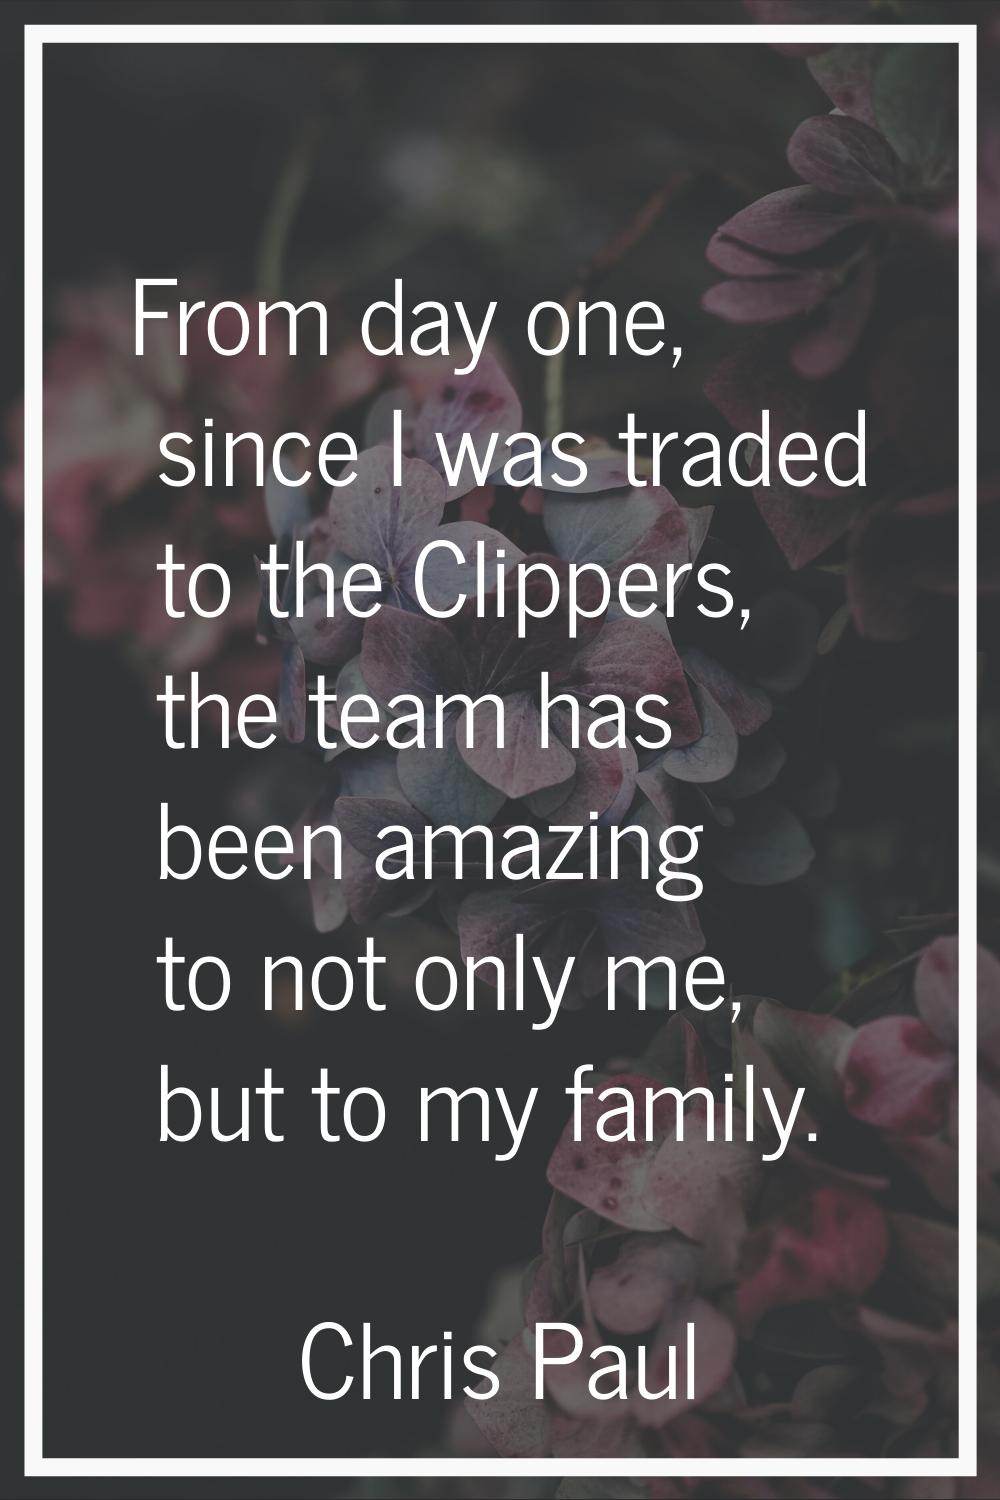 From day one, since I was traded to the Clippers, the team has been amazing to not only me, but to 